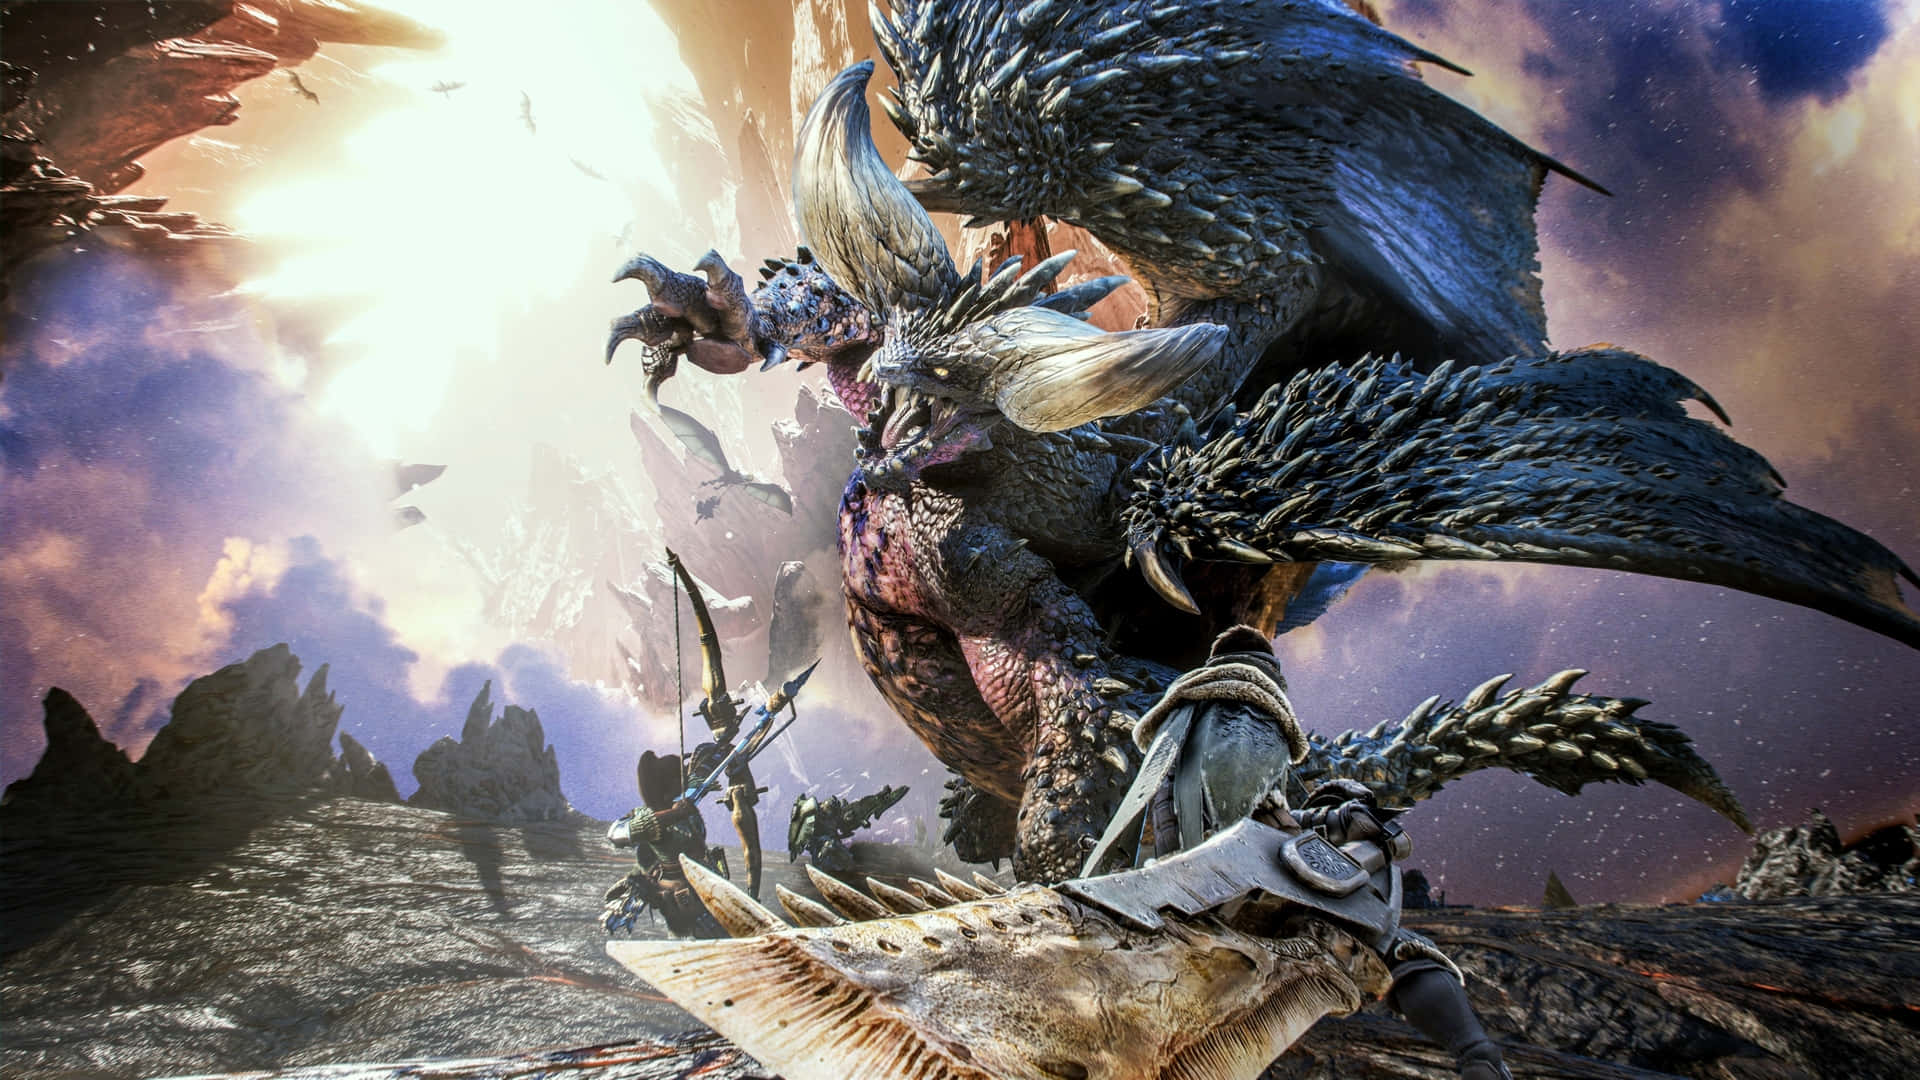 Hunt monsters of epic proportions with Monster Hunter World